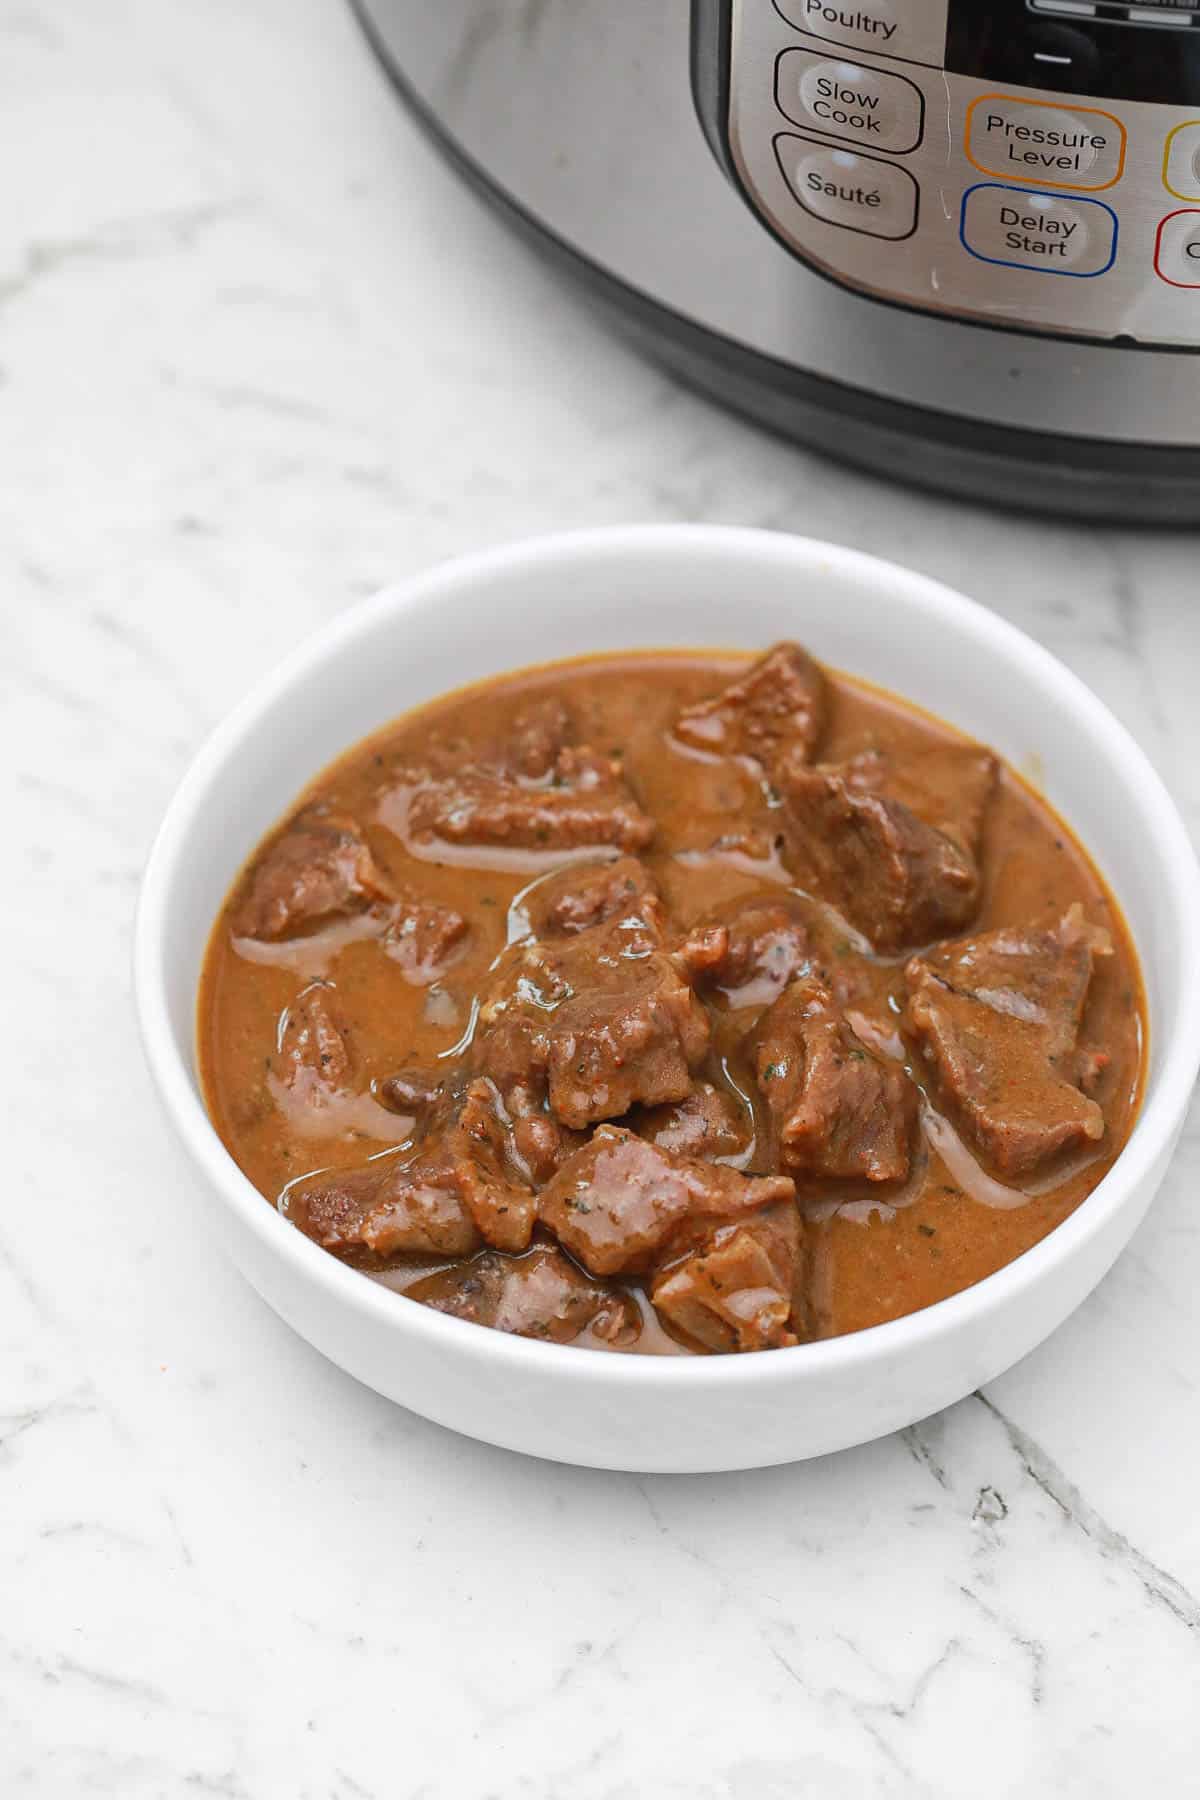 Instant pot beef tips and gravy in a white plate.